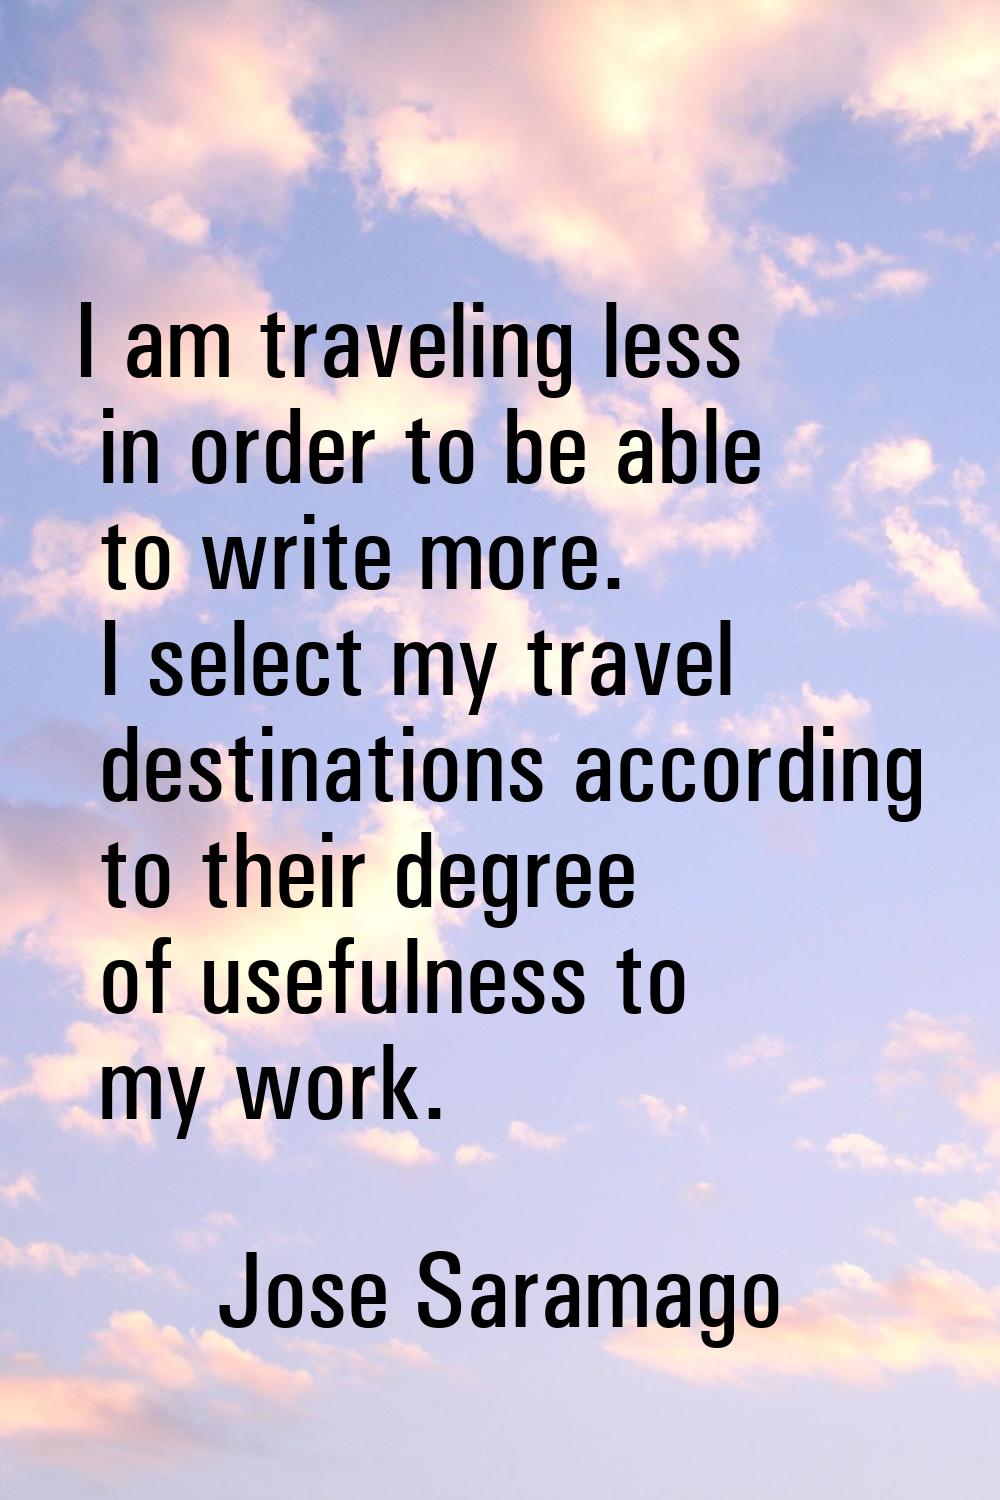 I am traveling less in order to be able to write more. I select my travel destinations according to